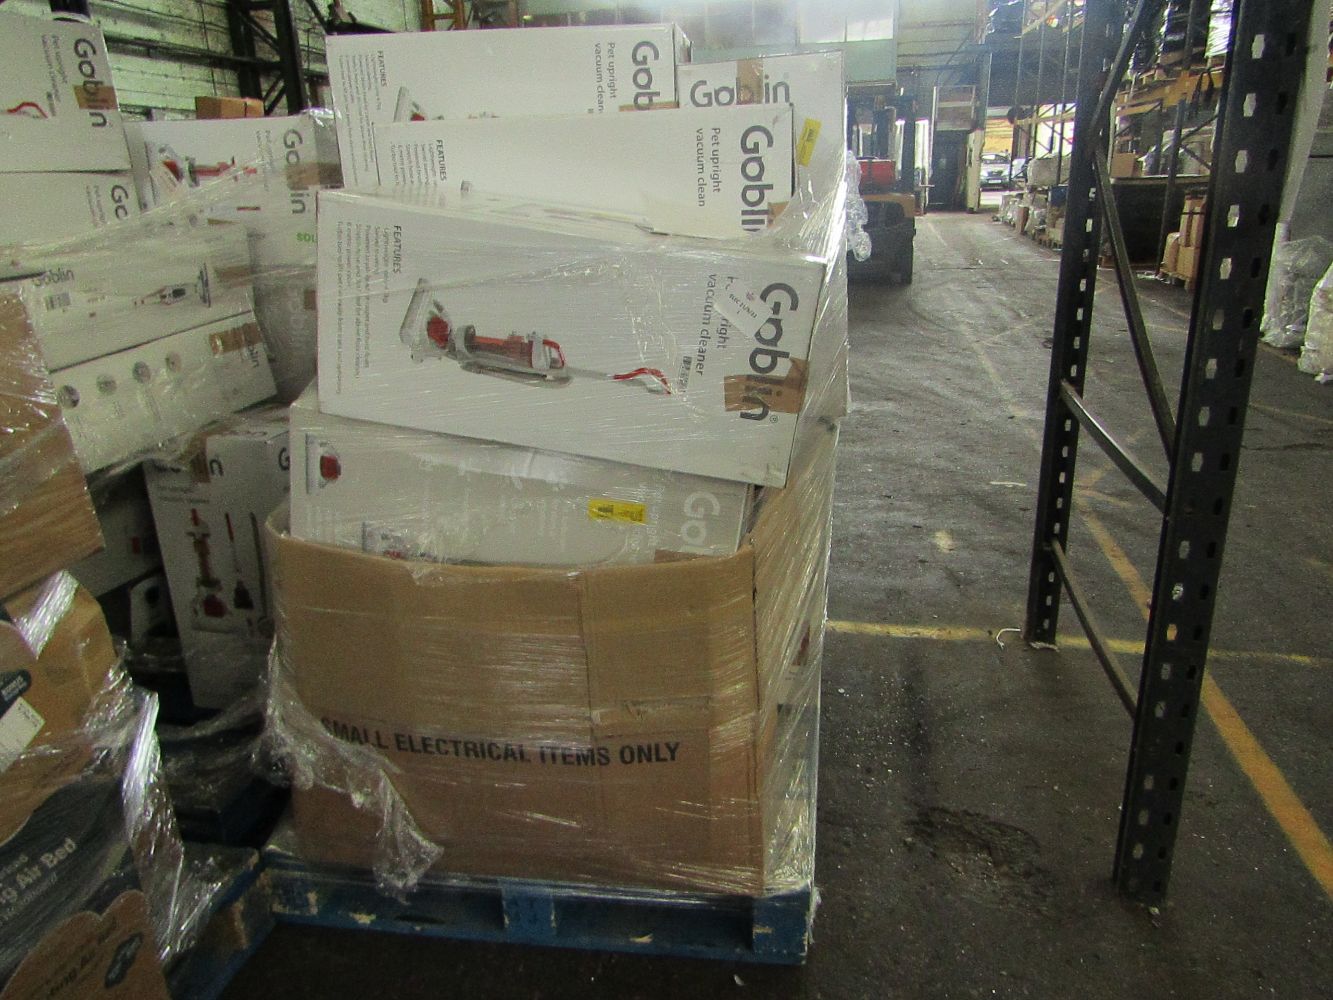 Pallets of Raw Electrical Returns from a National retail brand.